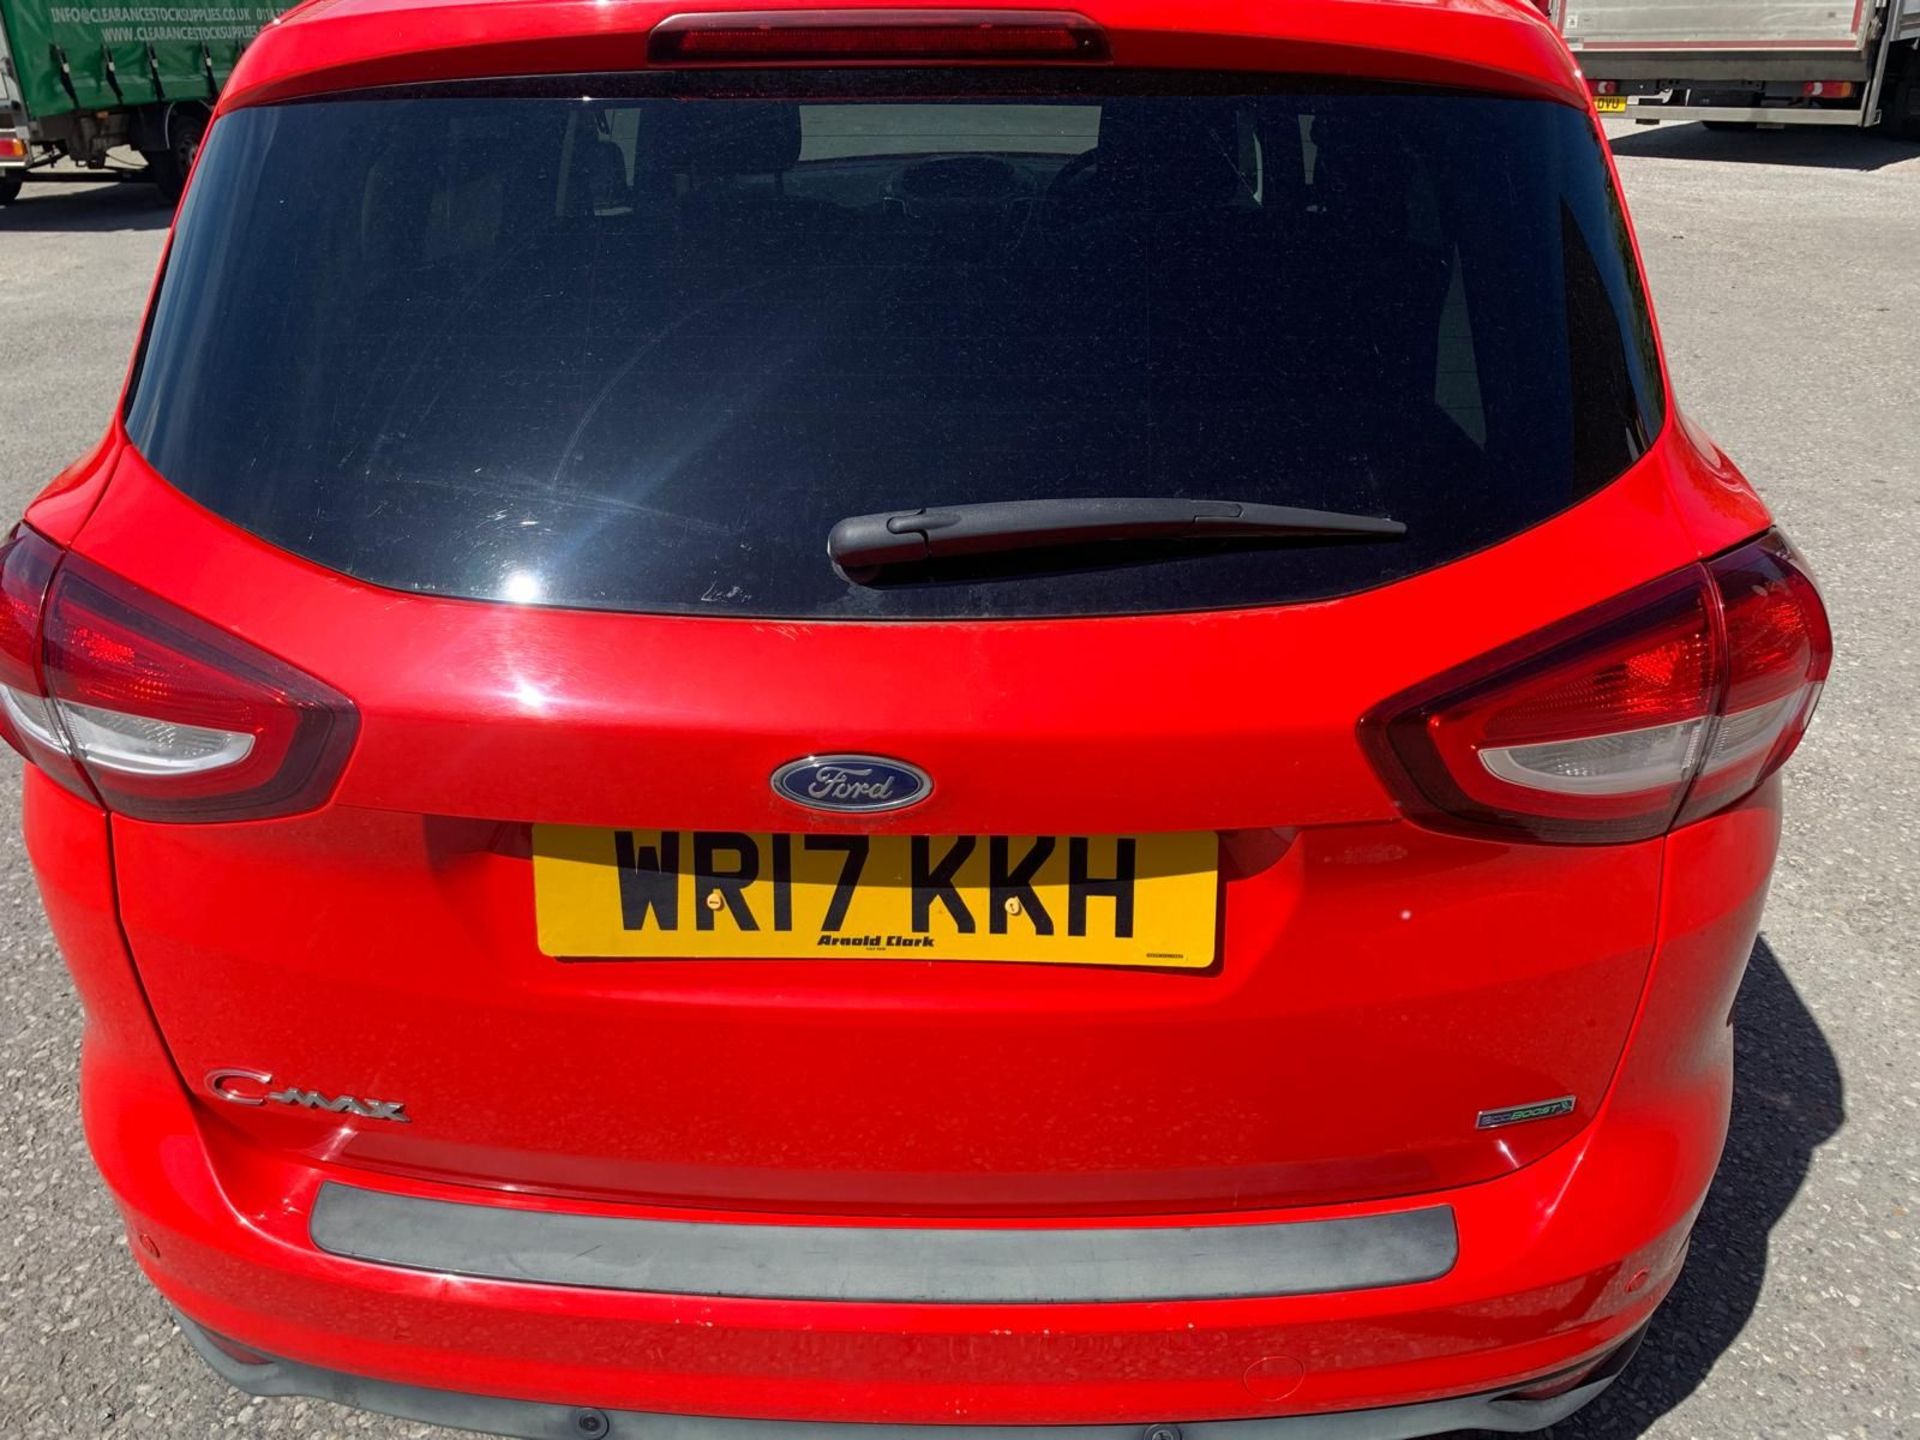 WR17 KKH FORD C-MAX. MOT Expiry: 09/10/2024 First Registered 31/03/2017 Petrol, Red - Image 4 of 10